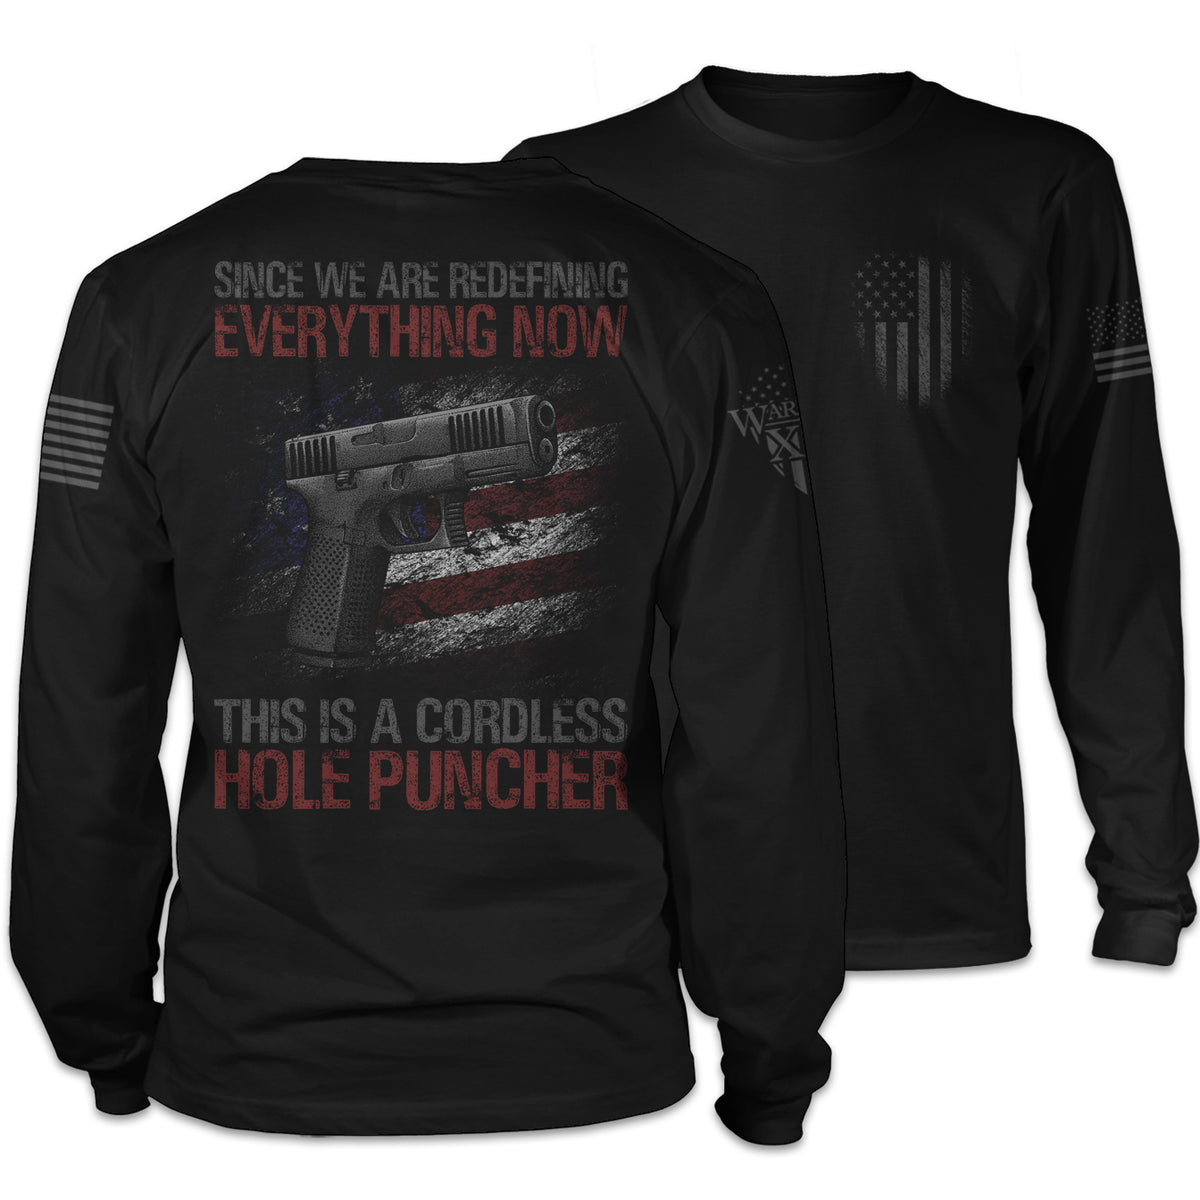 Front & back black long sleeve shirt with the words "Since we are redefining everything now, this is a cordless hole puncher", with a pistol printed on the back of the shirt.on the back of the shirt.